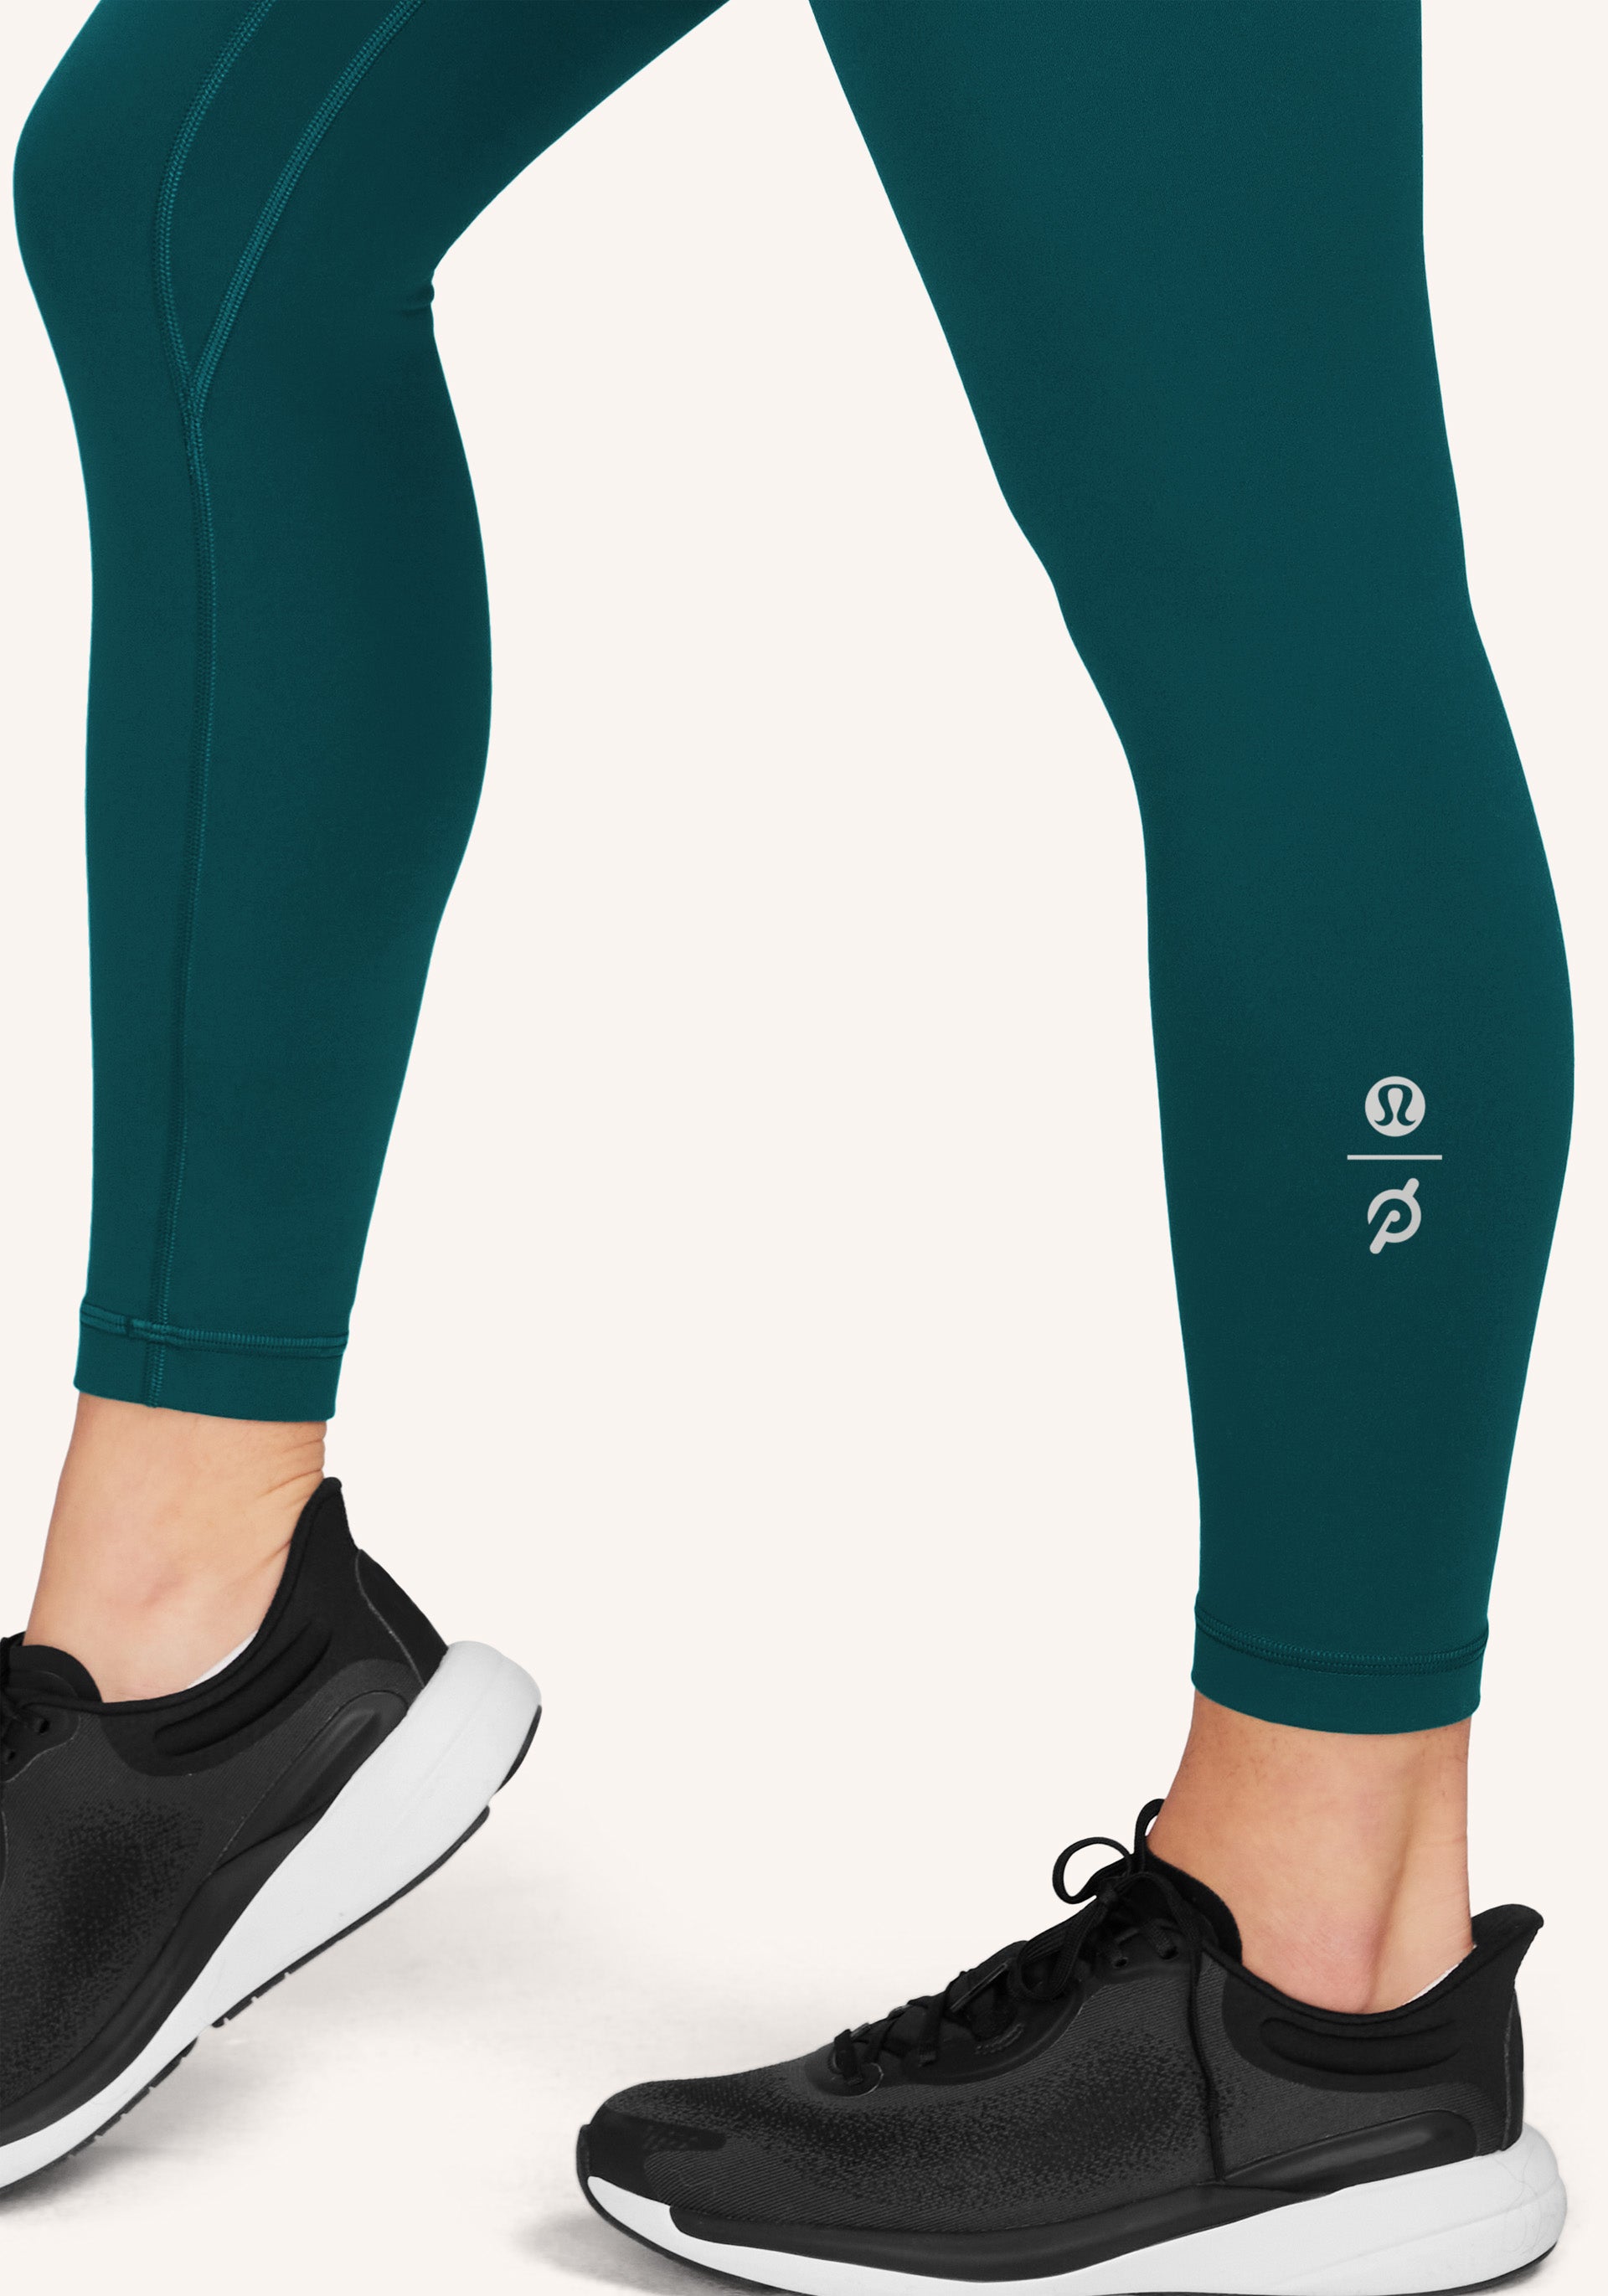 Lululemon Align Pant Sz 6/10 - $93 New With Tags - From Yolanda